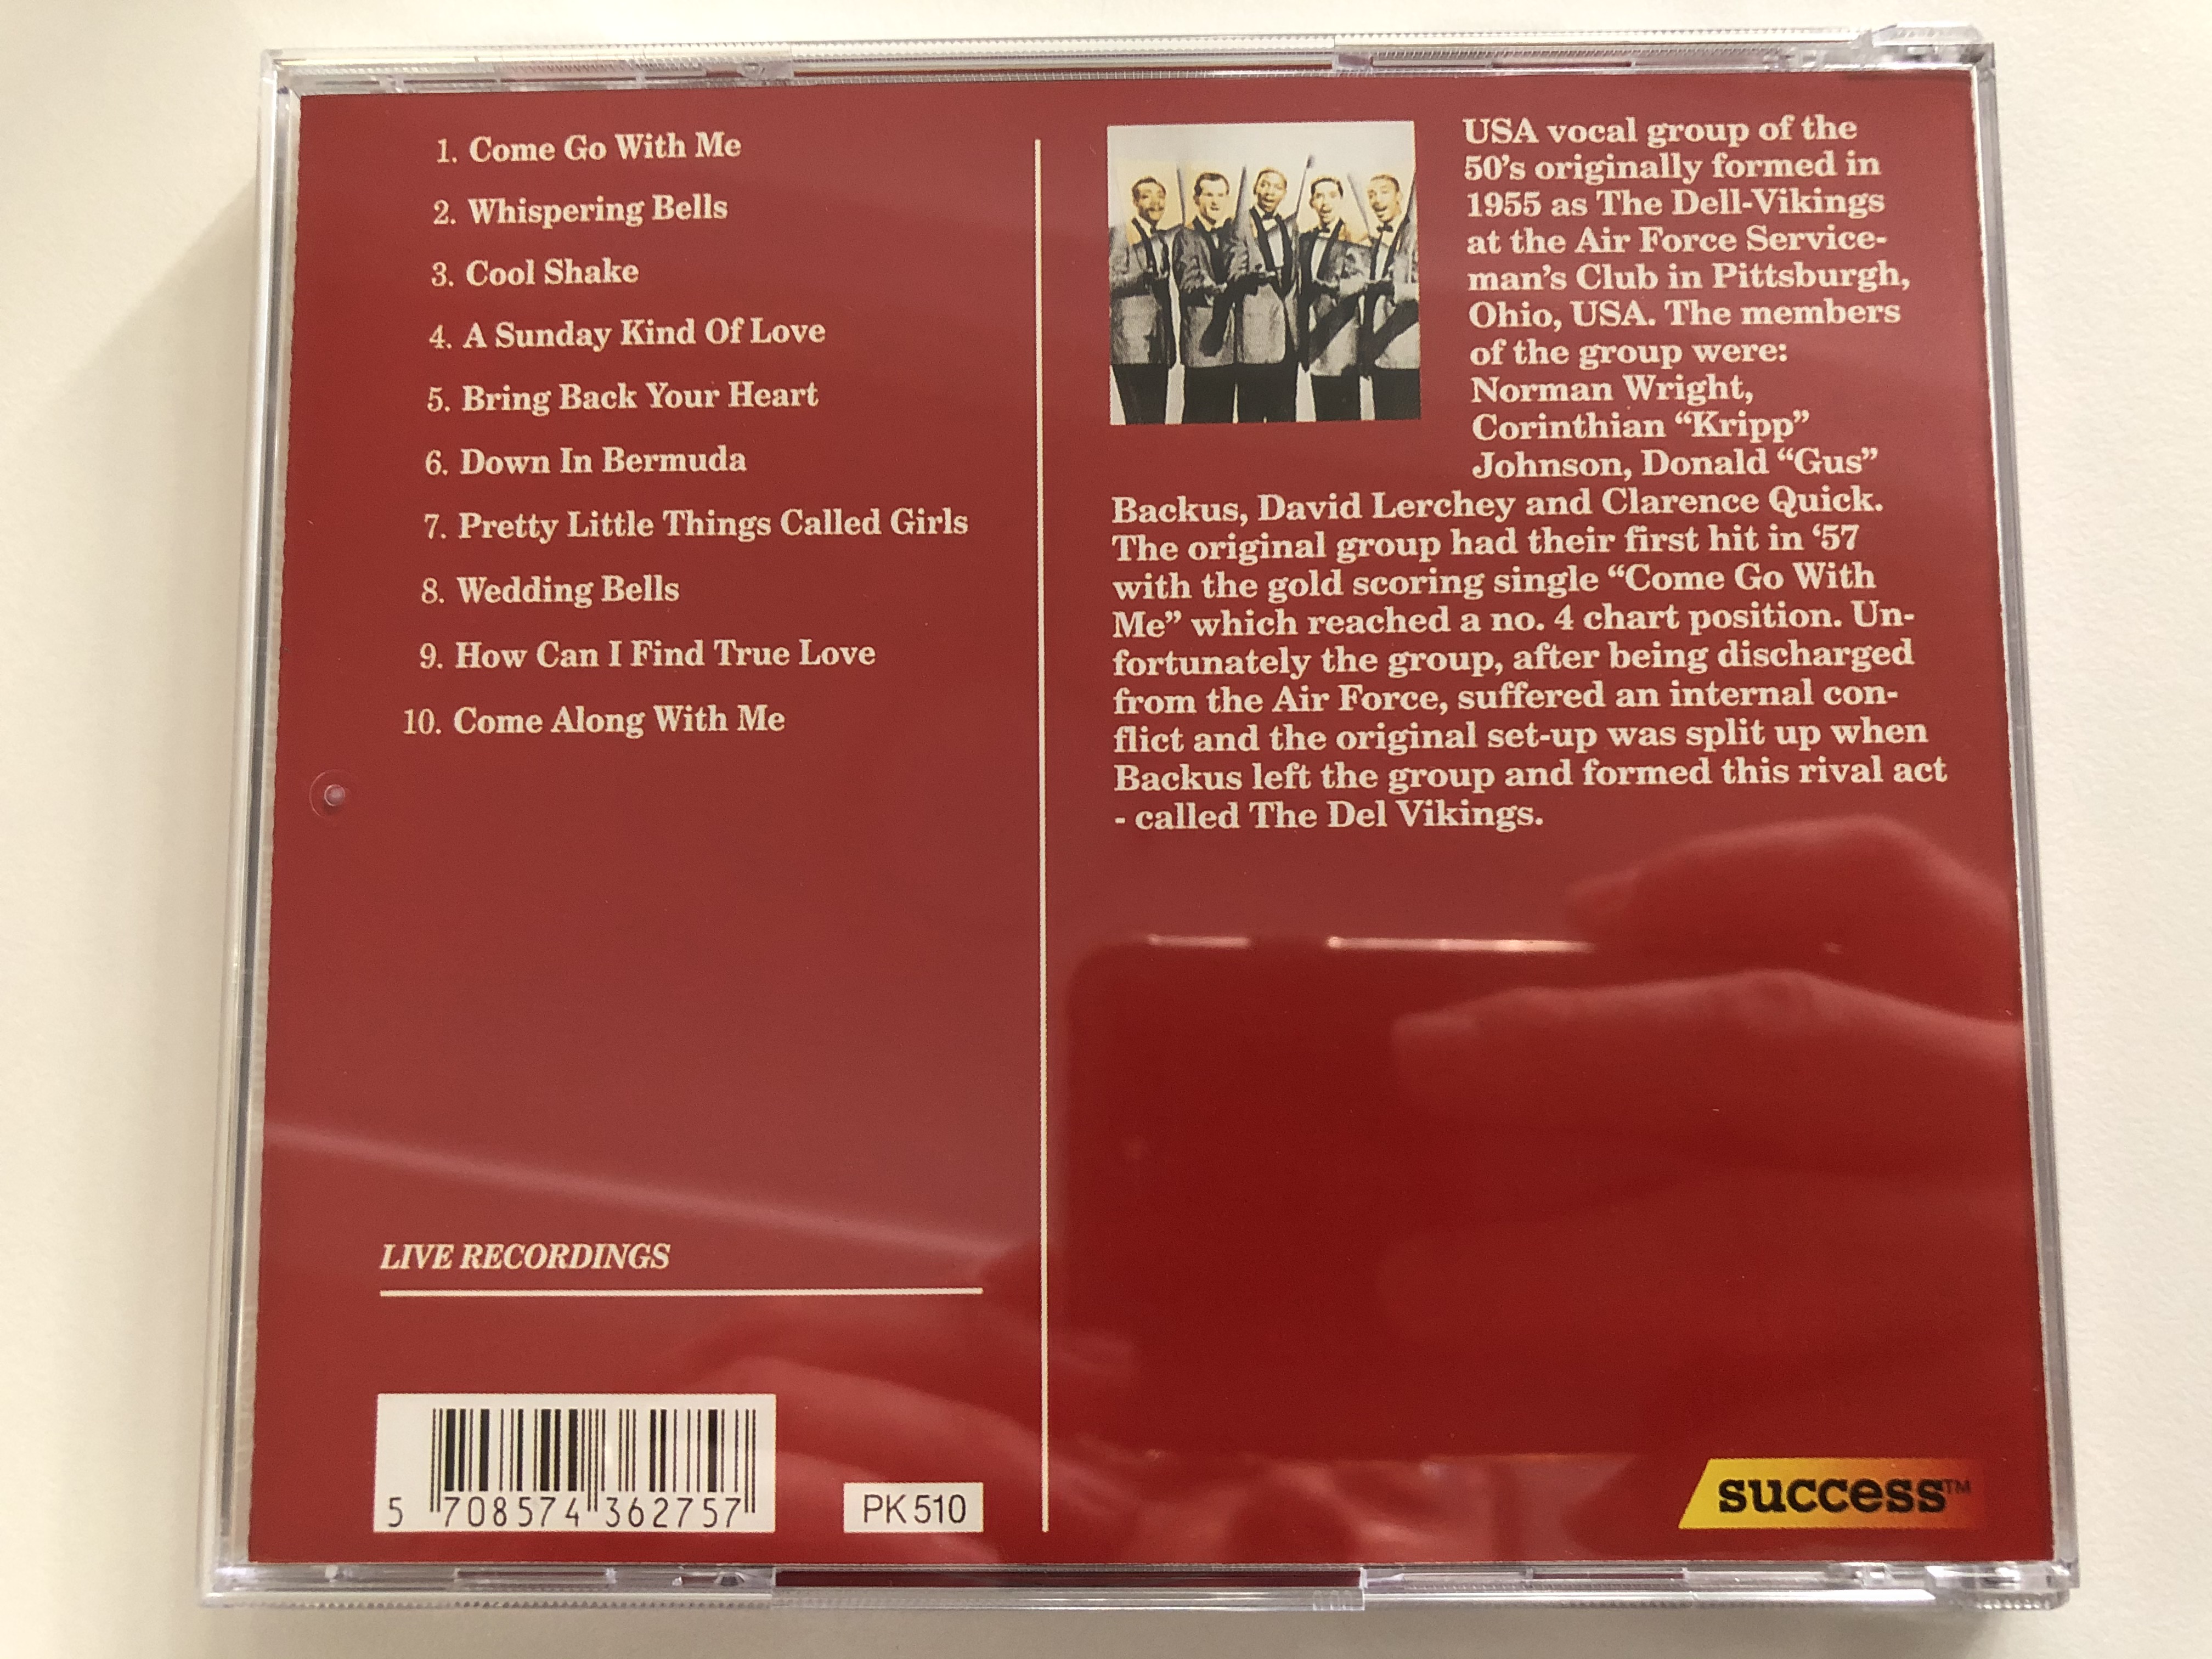 the-dell-vikings-come-go-with-me-biographical-details-on-the-back-elap-music-audio-cd-1996-16275-cd-4-.jpg